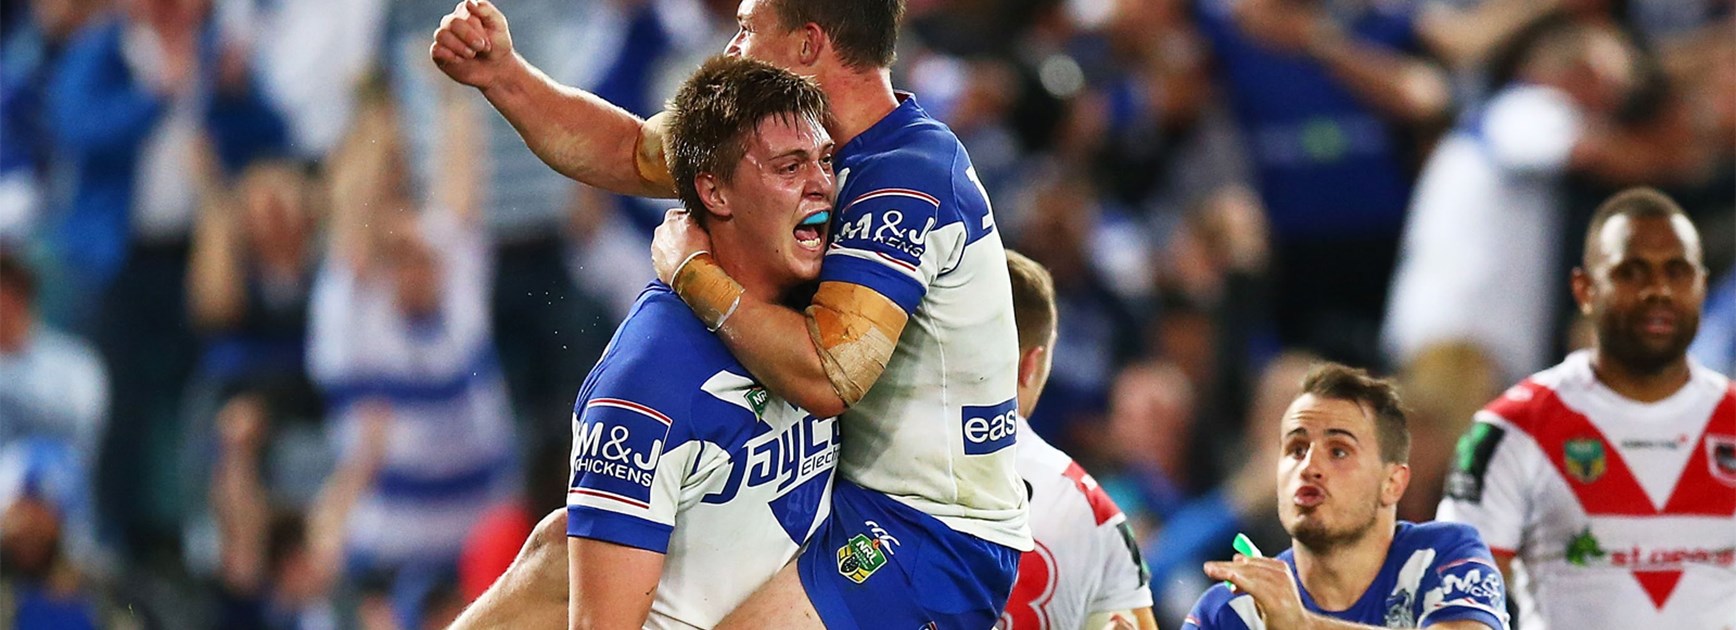 The Bulldogs celebrate Shaun Lane's try against the Dragons.